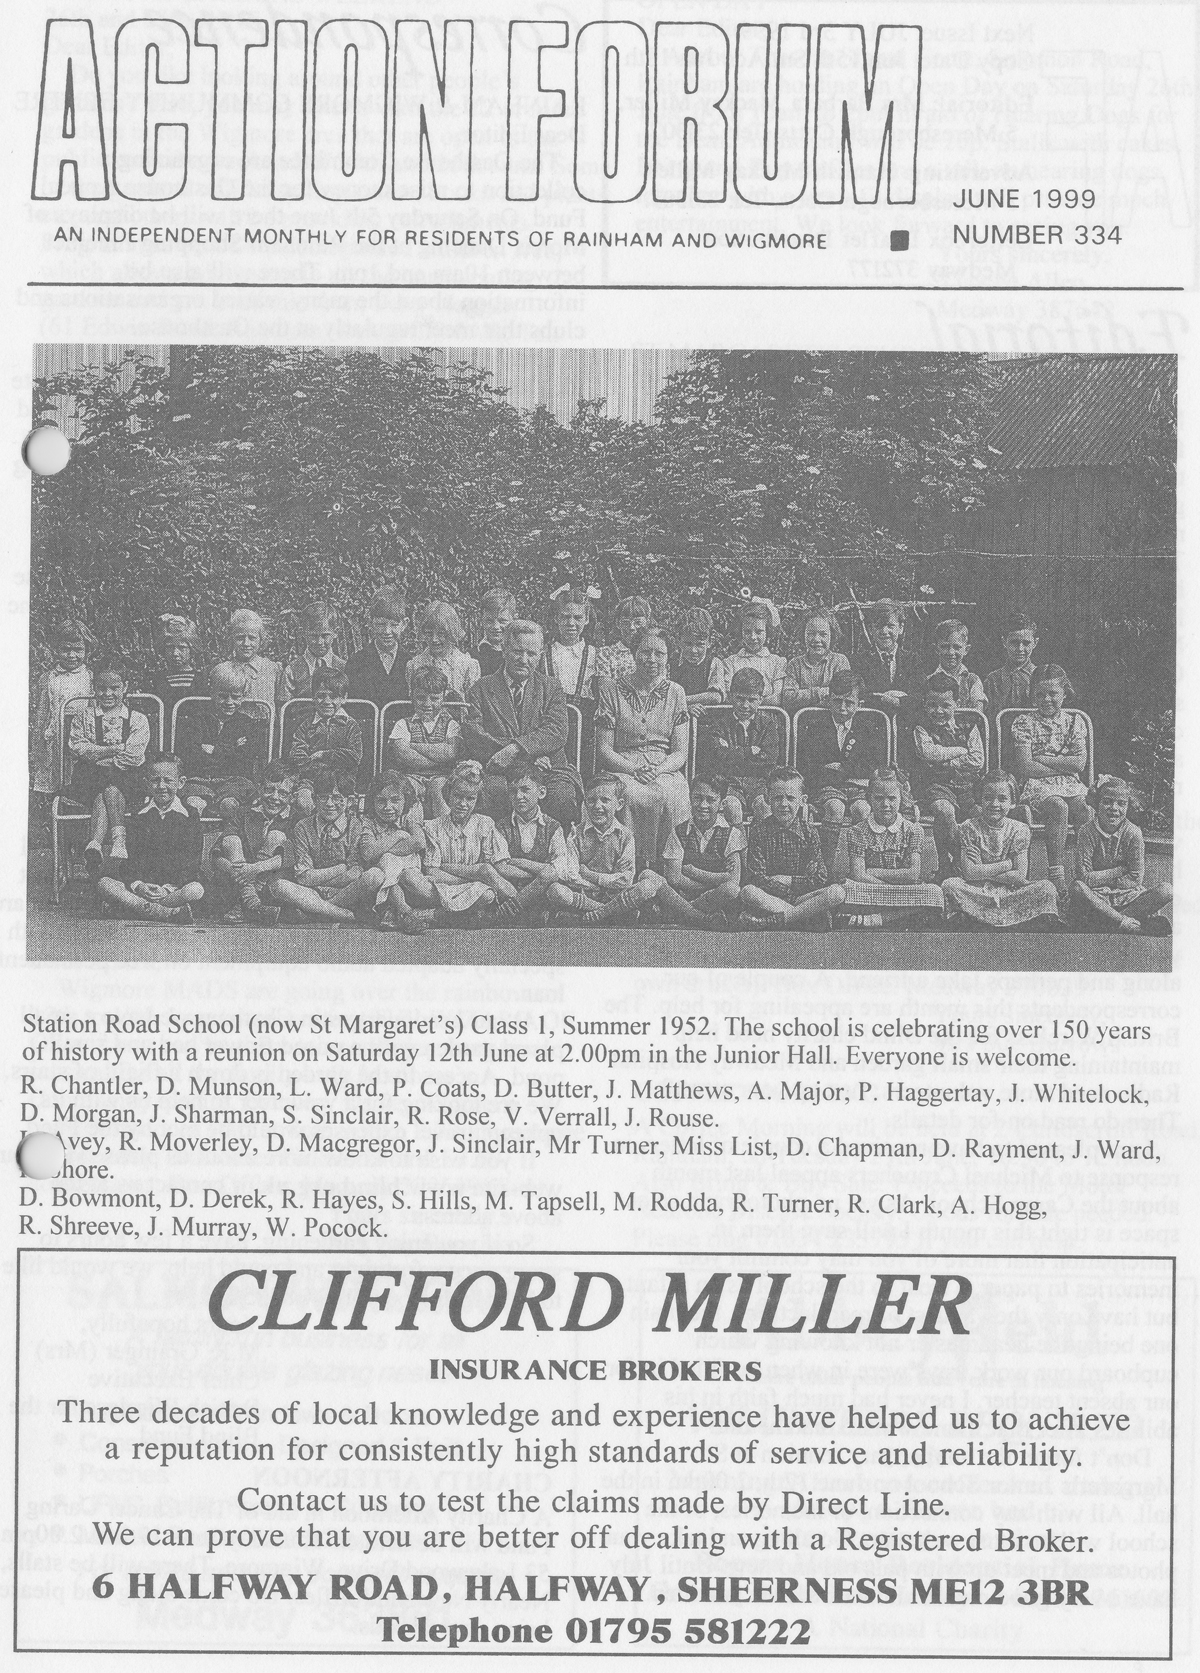 Cover photo is the children of Station Road School Class1 now St Margarets in summer 1952.